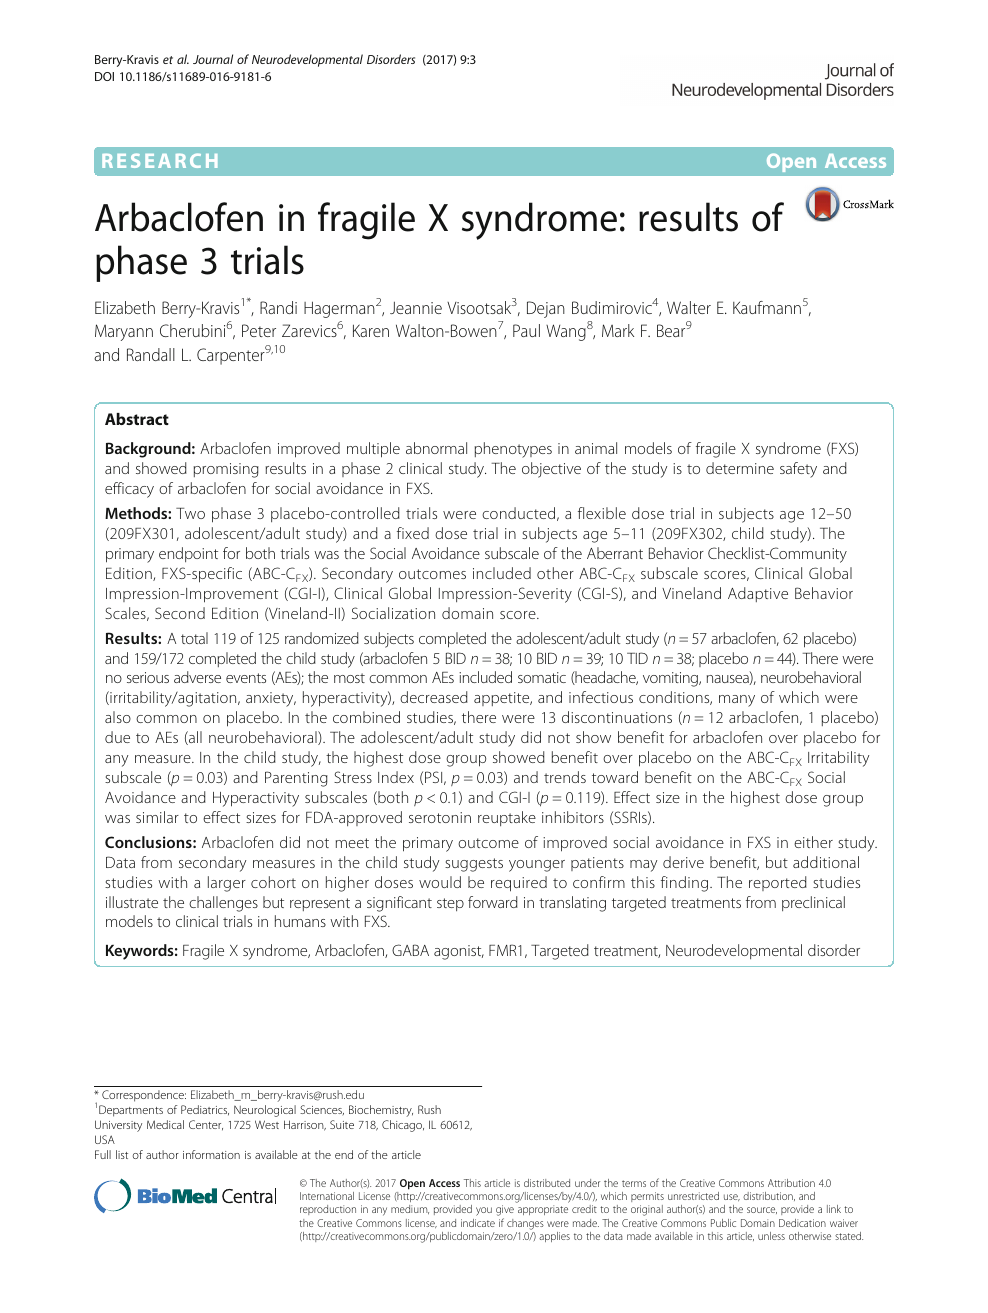 Arbaclofen In Fragile X Syndrome Results Of Phase 3 Trials Topic Of Research Paper In Clinical Medicine Download Scholarly Article Pdf And Read For Free On Cyberleninka Open Science Hub